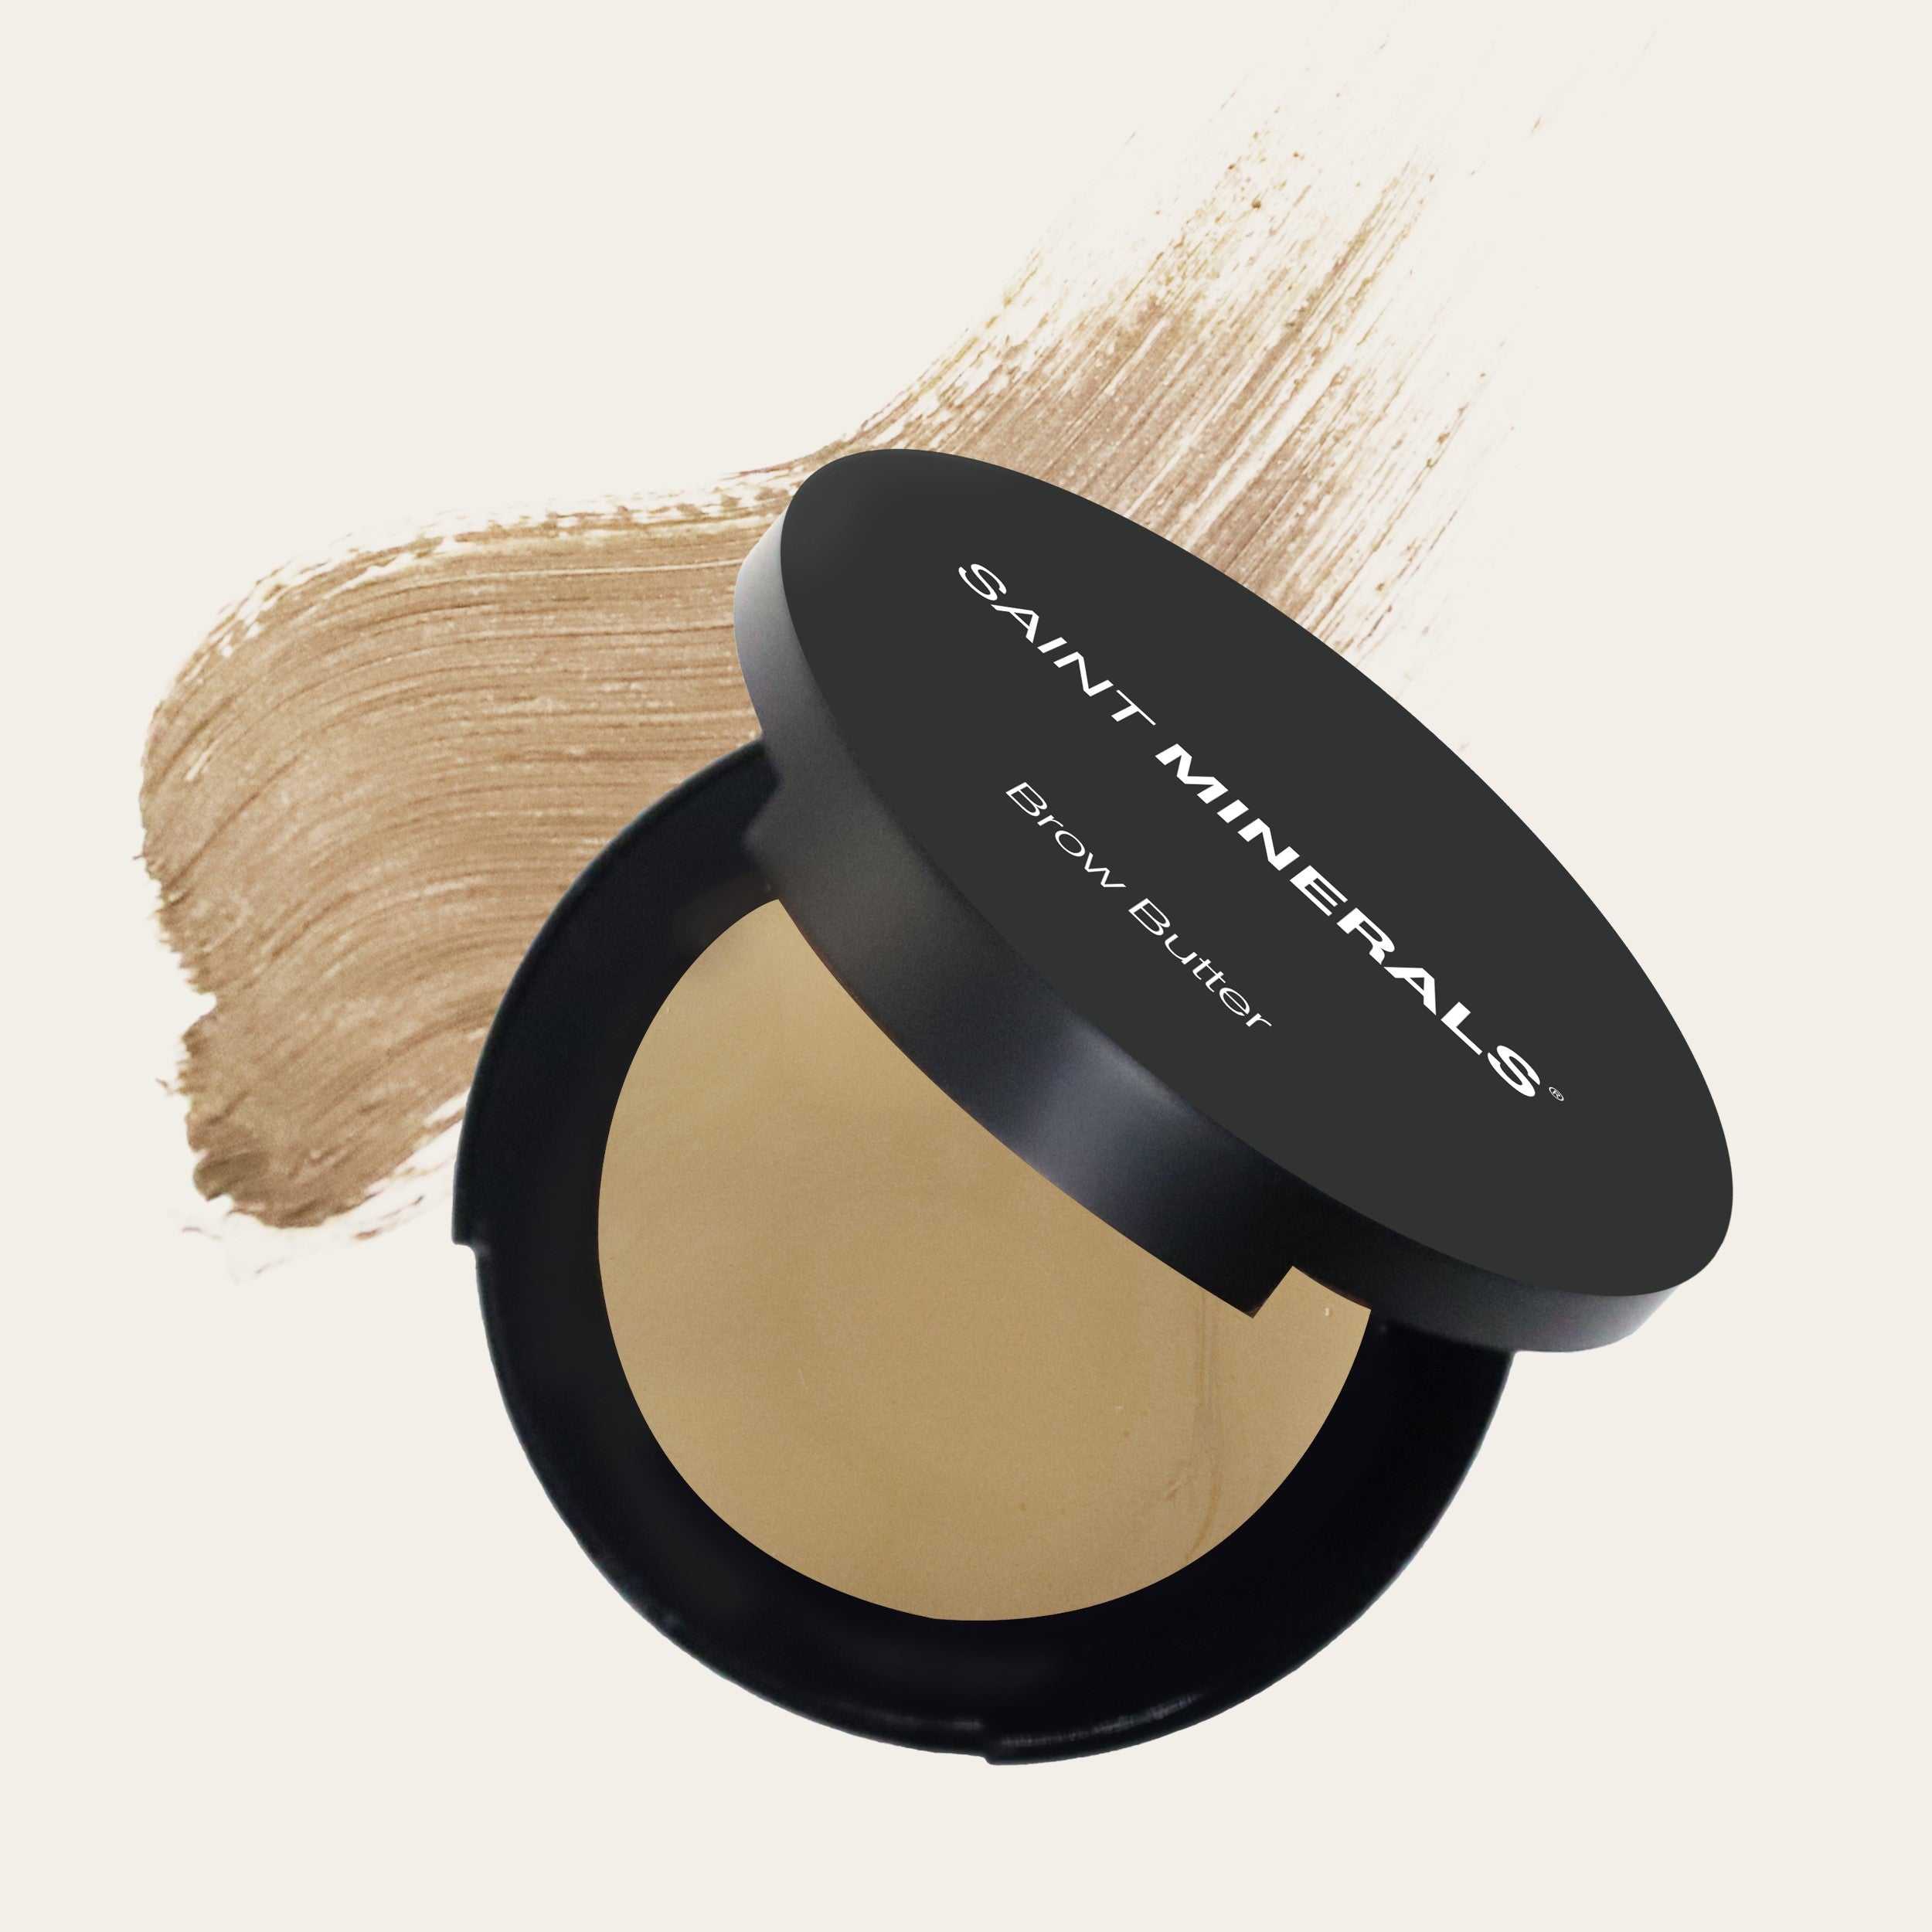 SAINT MINERALS Brow Butters - Panoply Beauty 